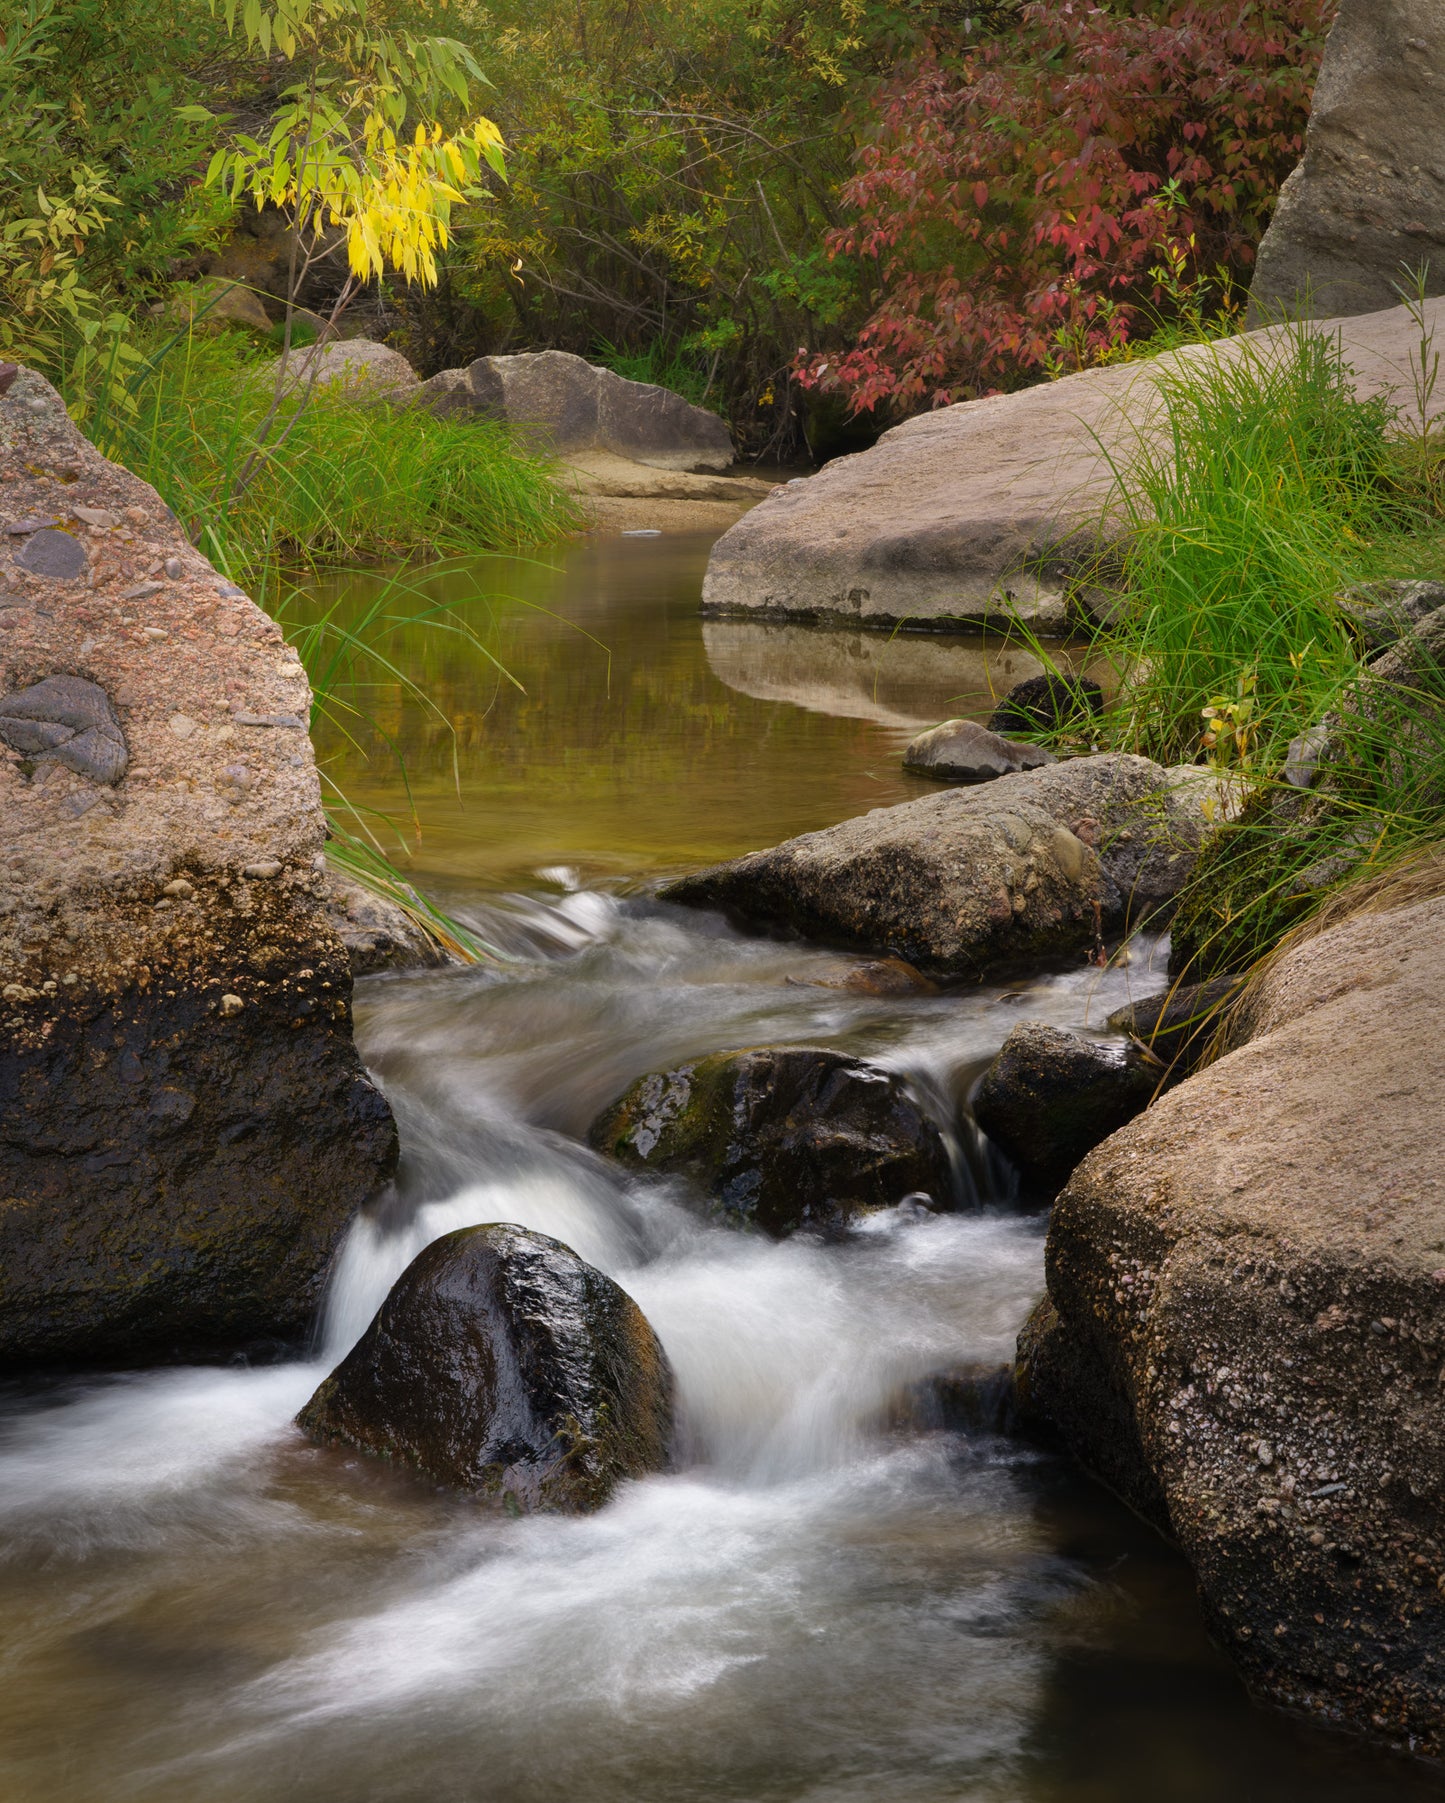 I always find the bubbling of a creek to be peaceful. In this fine art nature image, the early fall colors accentuated the restfulness in Castlewood Canyon state Park, CO.